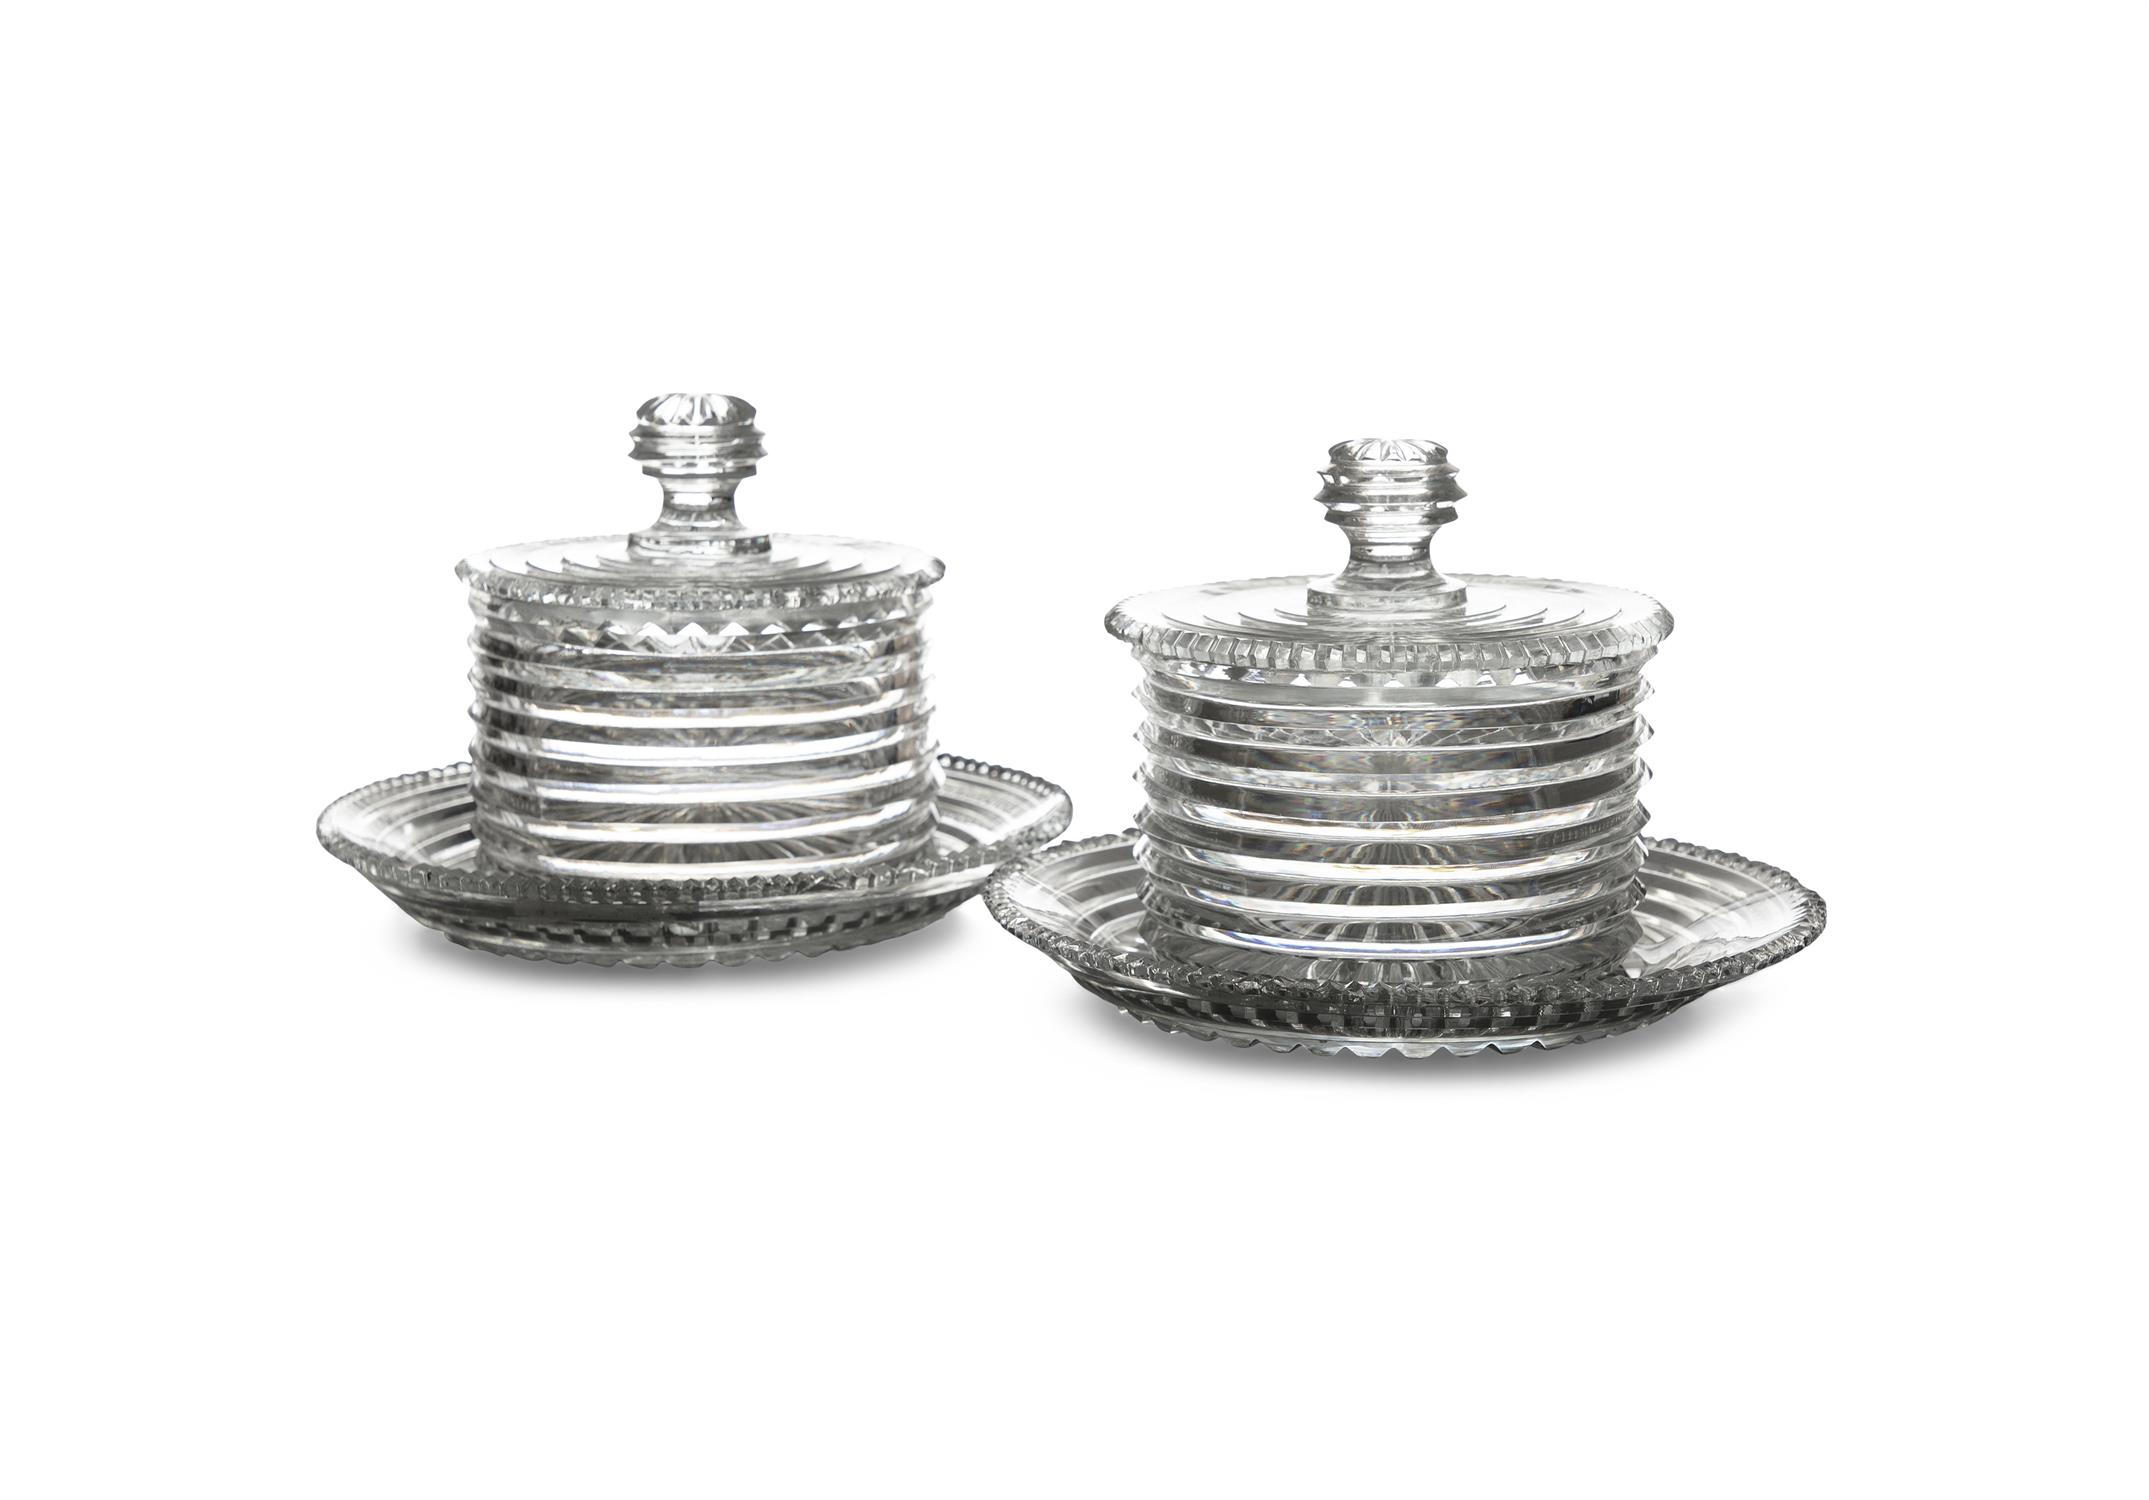 A FINE PAIR OF IRISH REGENCY CUTGLASS BUTTER POTS AND COVERS, with stands c.1800, - Image 2 of 2